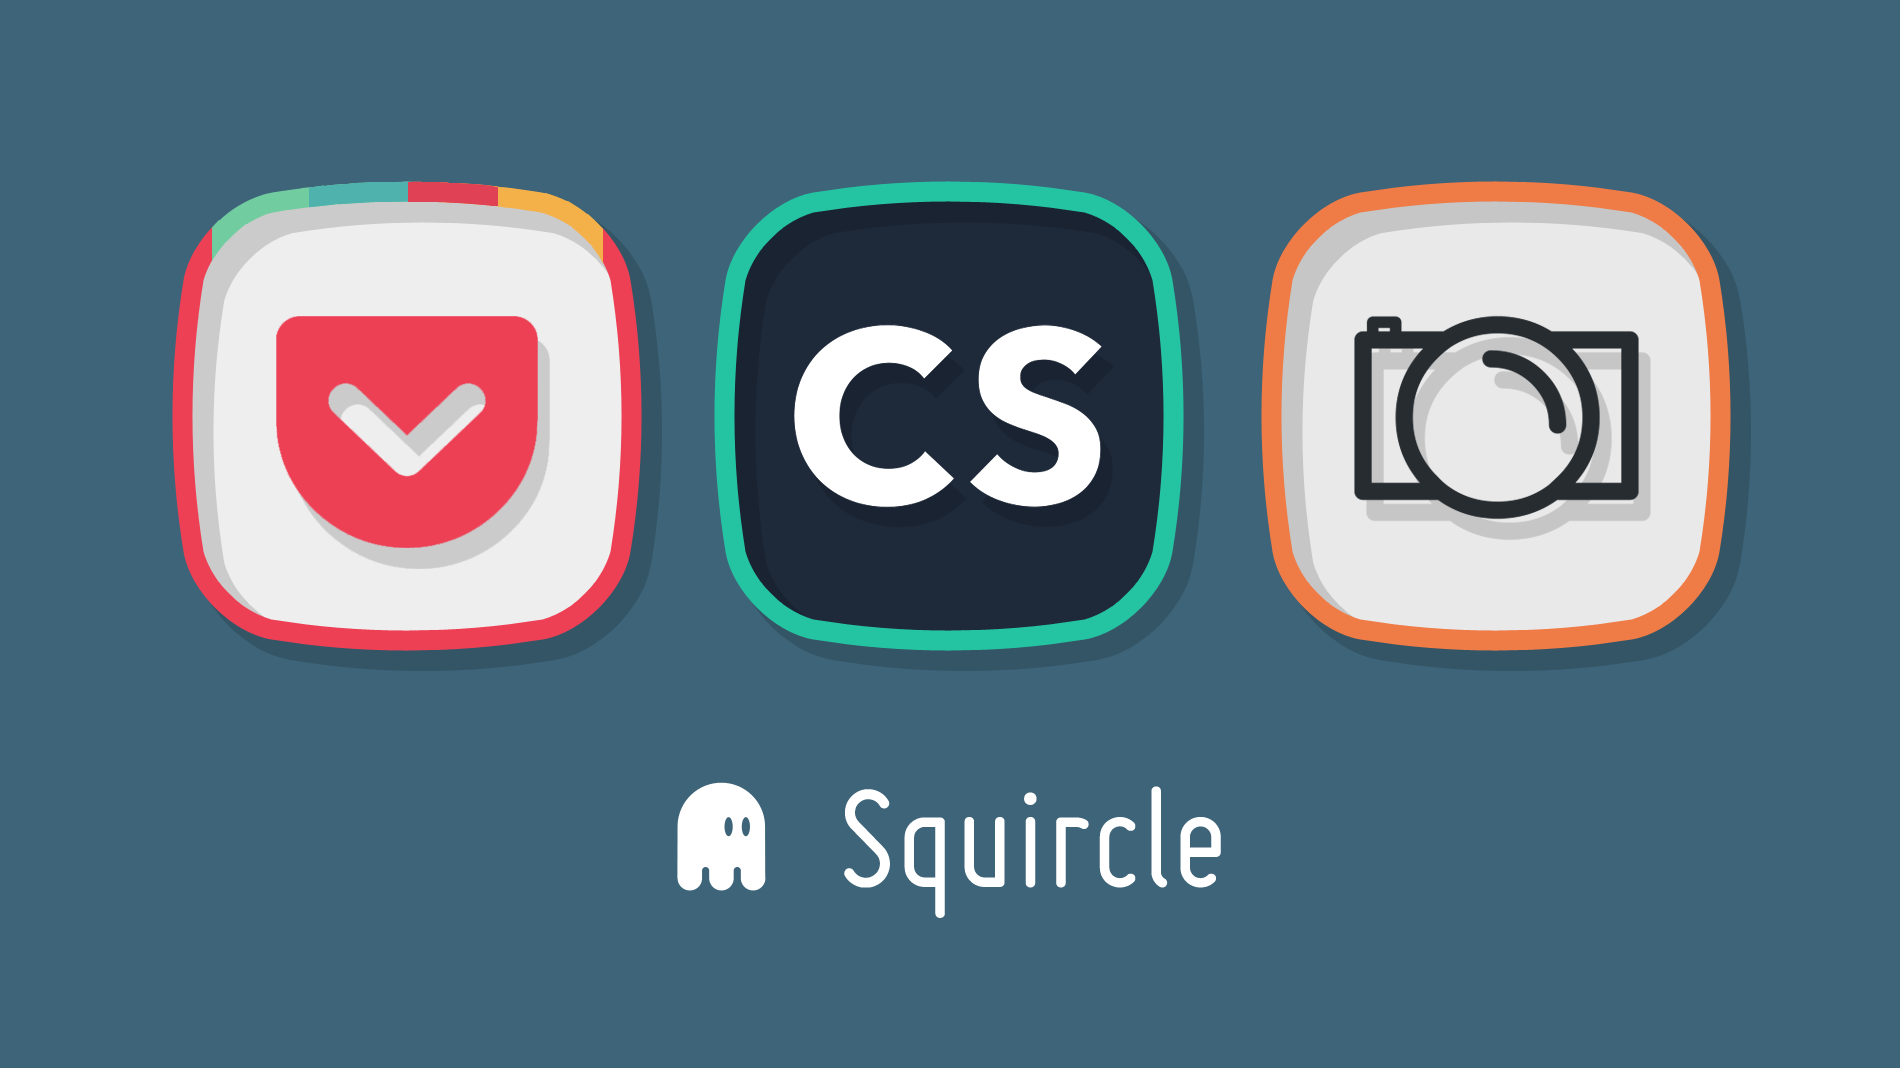 Promotional design for Squircle